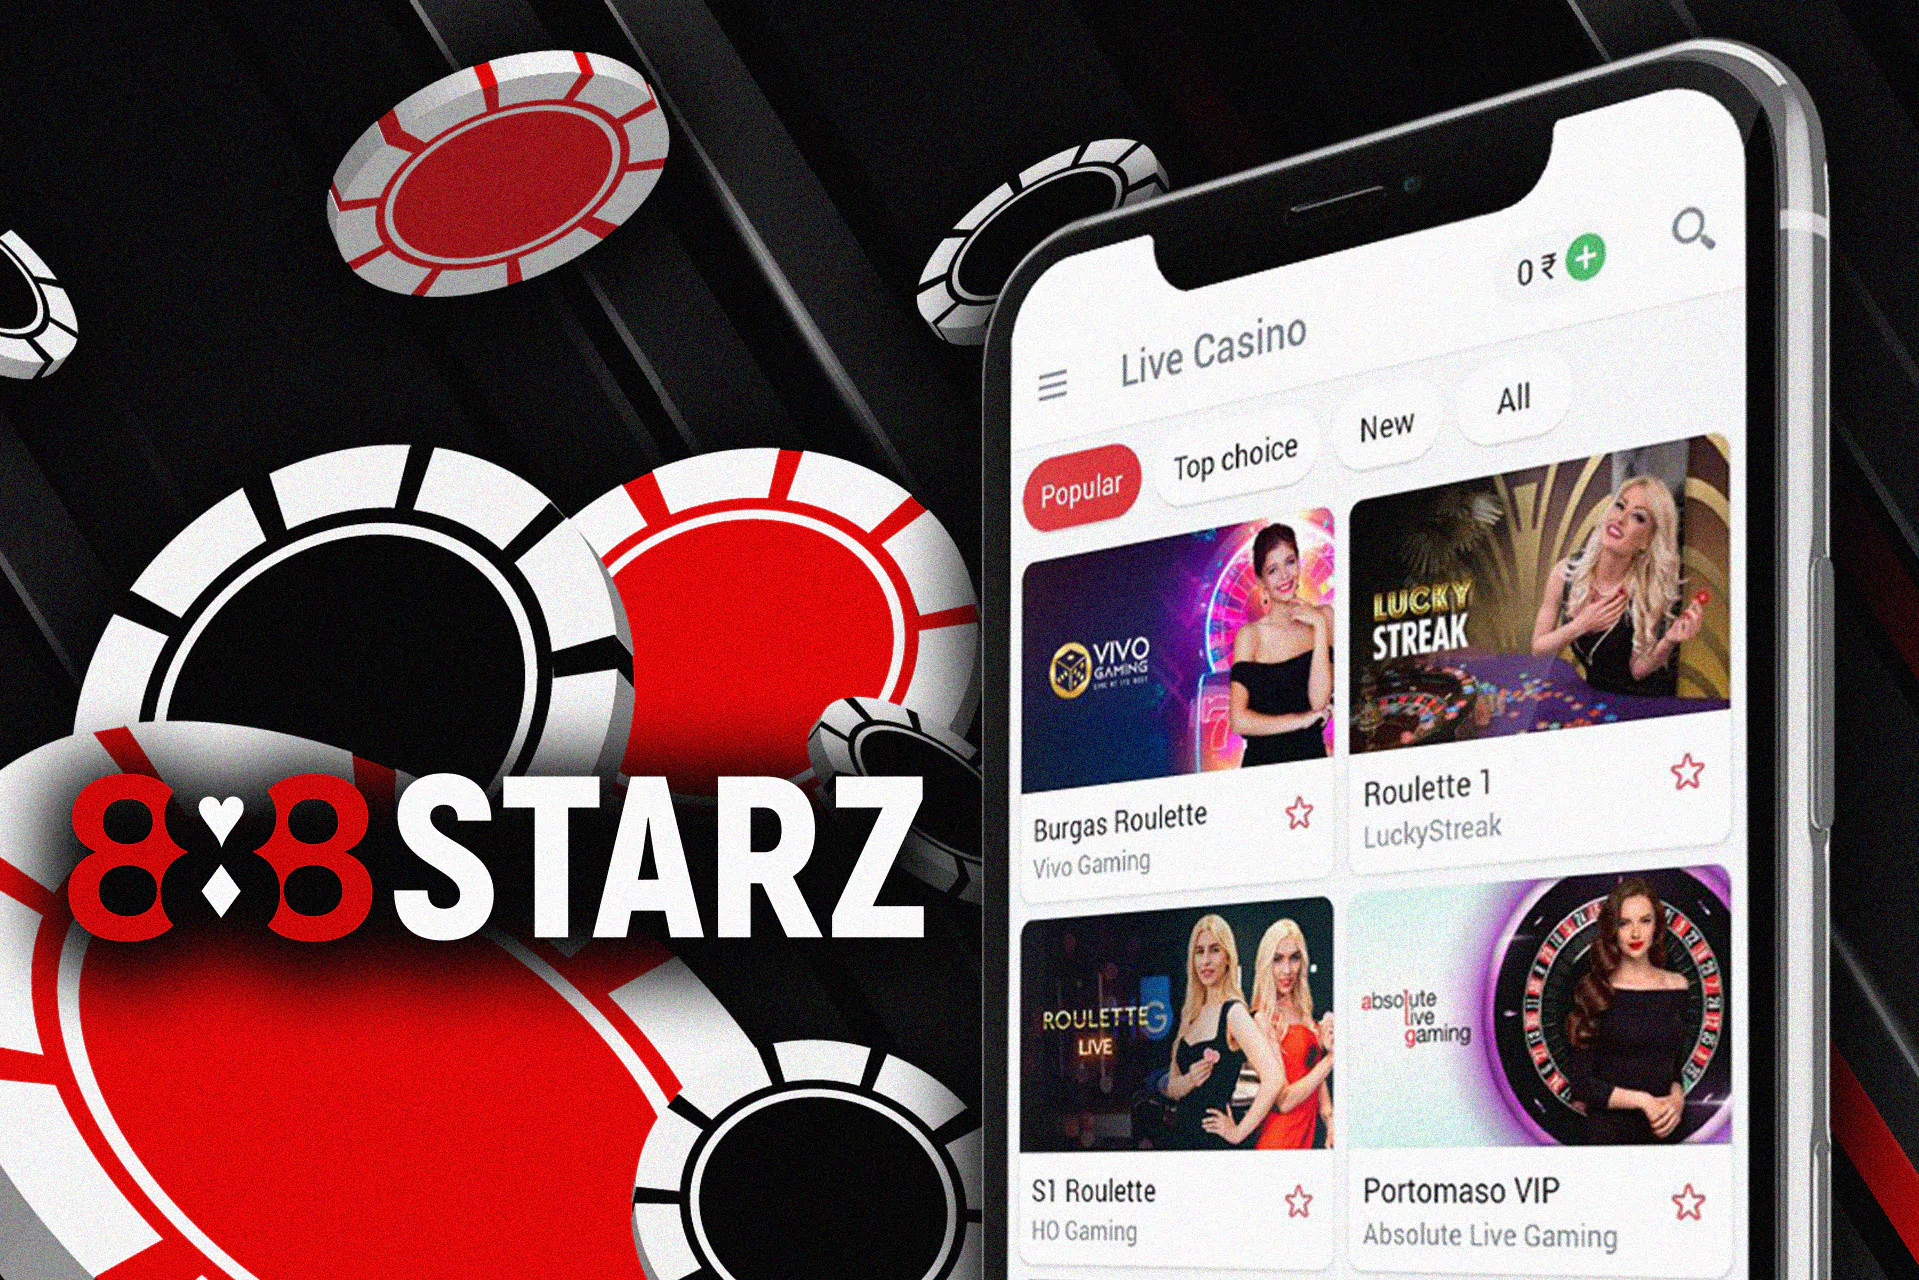 Online casino games are also available in the app.